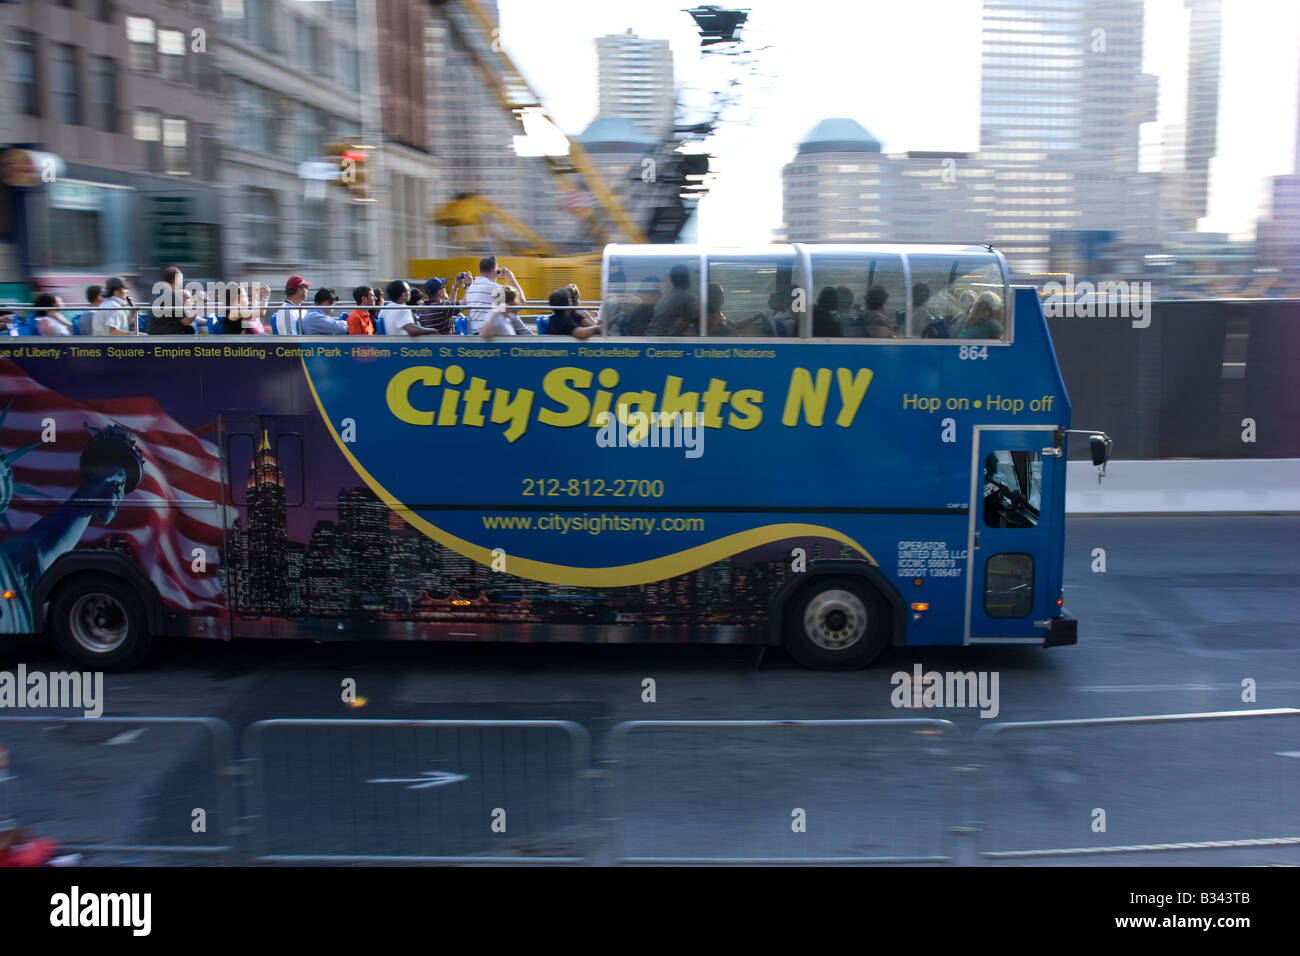 Tourists stand on a City Sights NY tour bus to see over the Ground Zero fence. Stock Photo